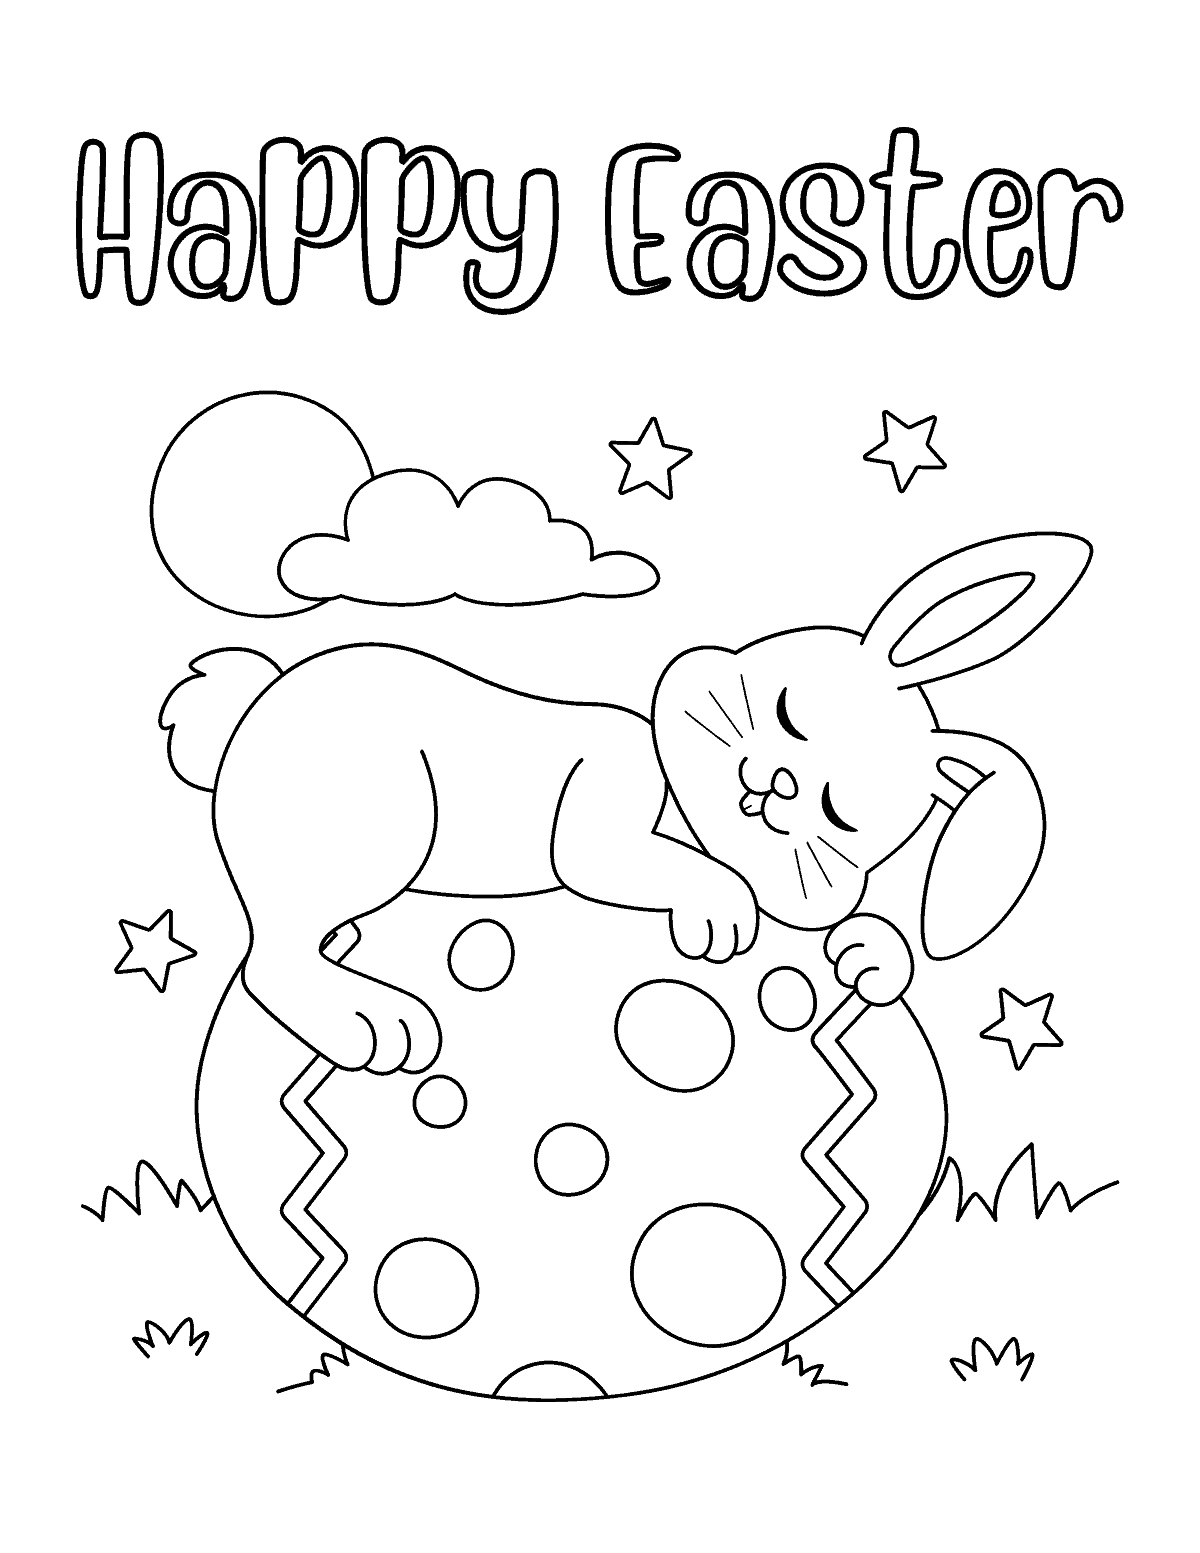 Bunny Sleeping on Top of Easter Egg Coloring Sheet